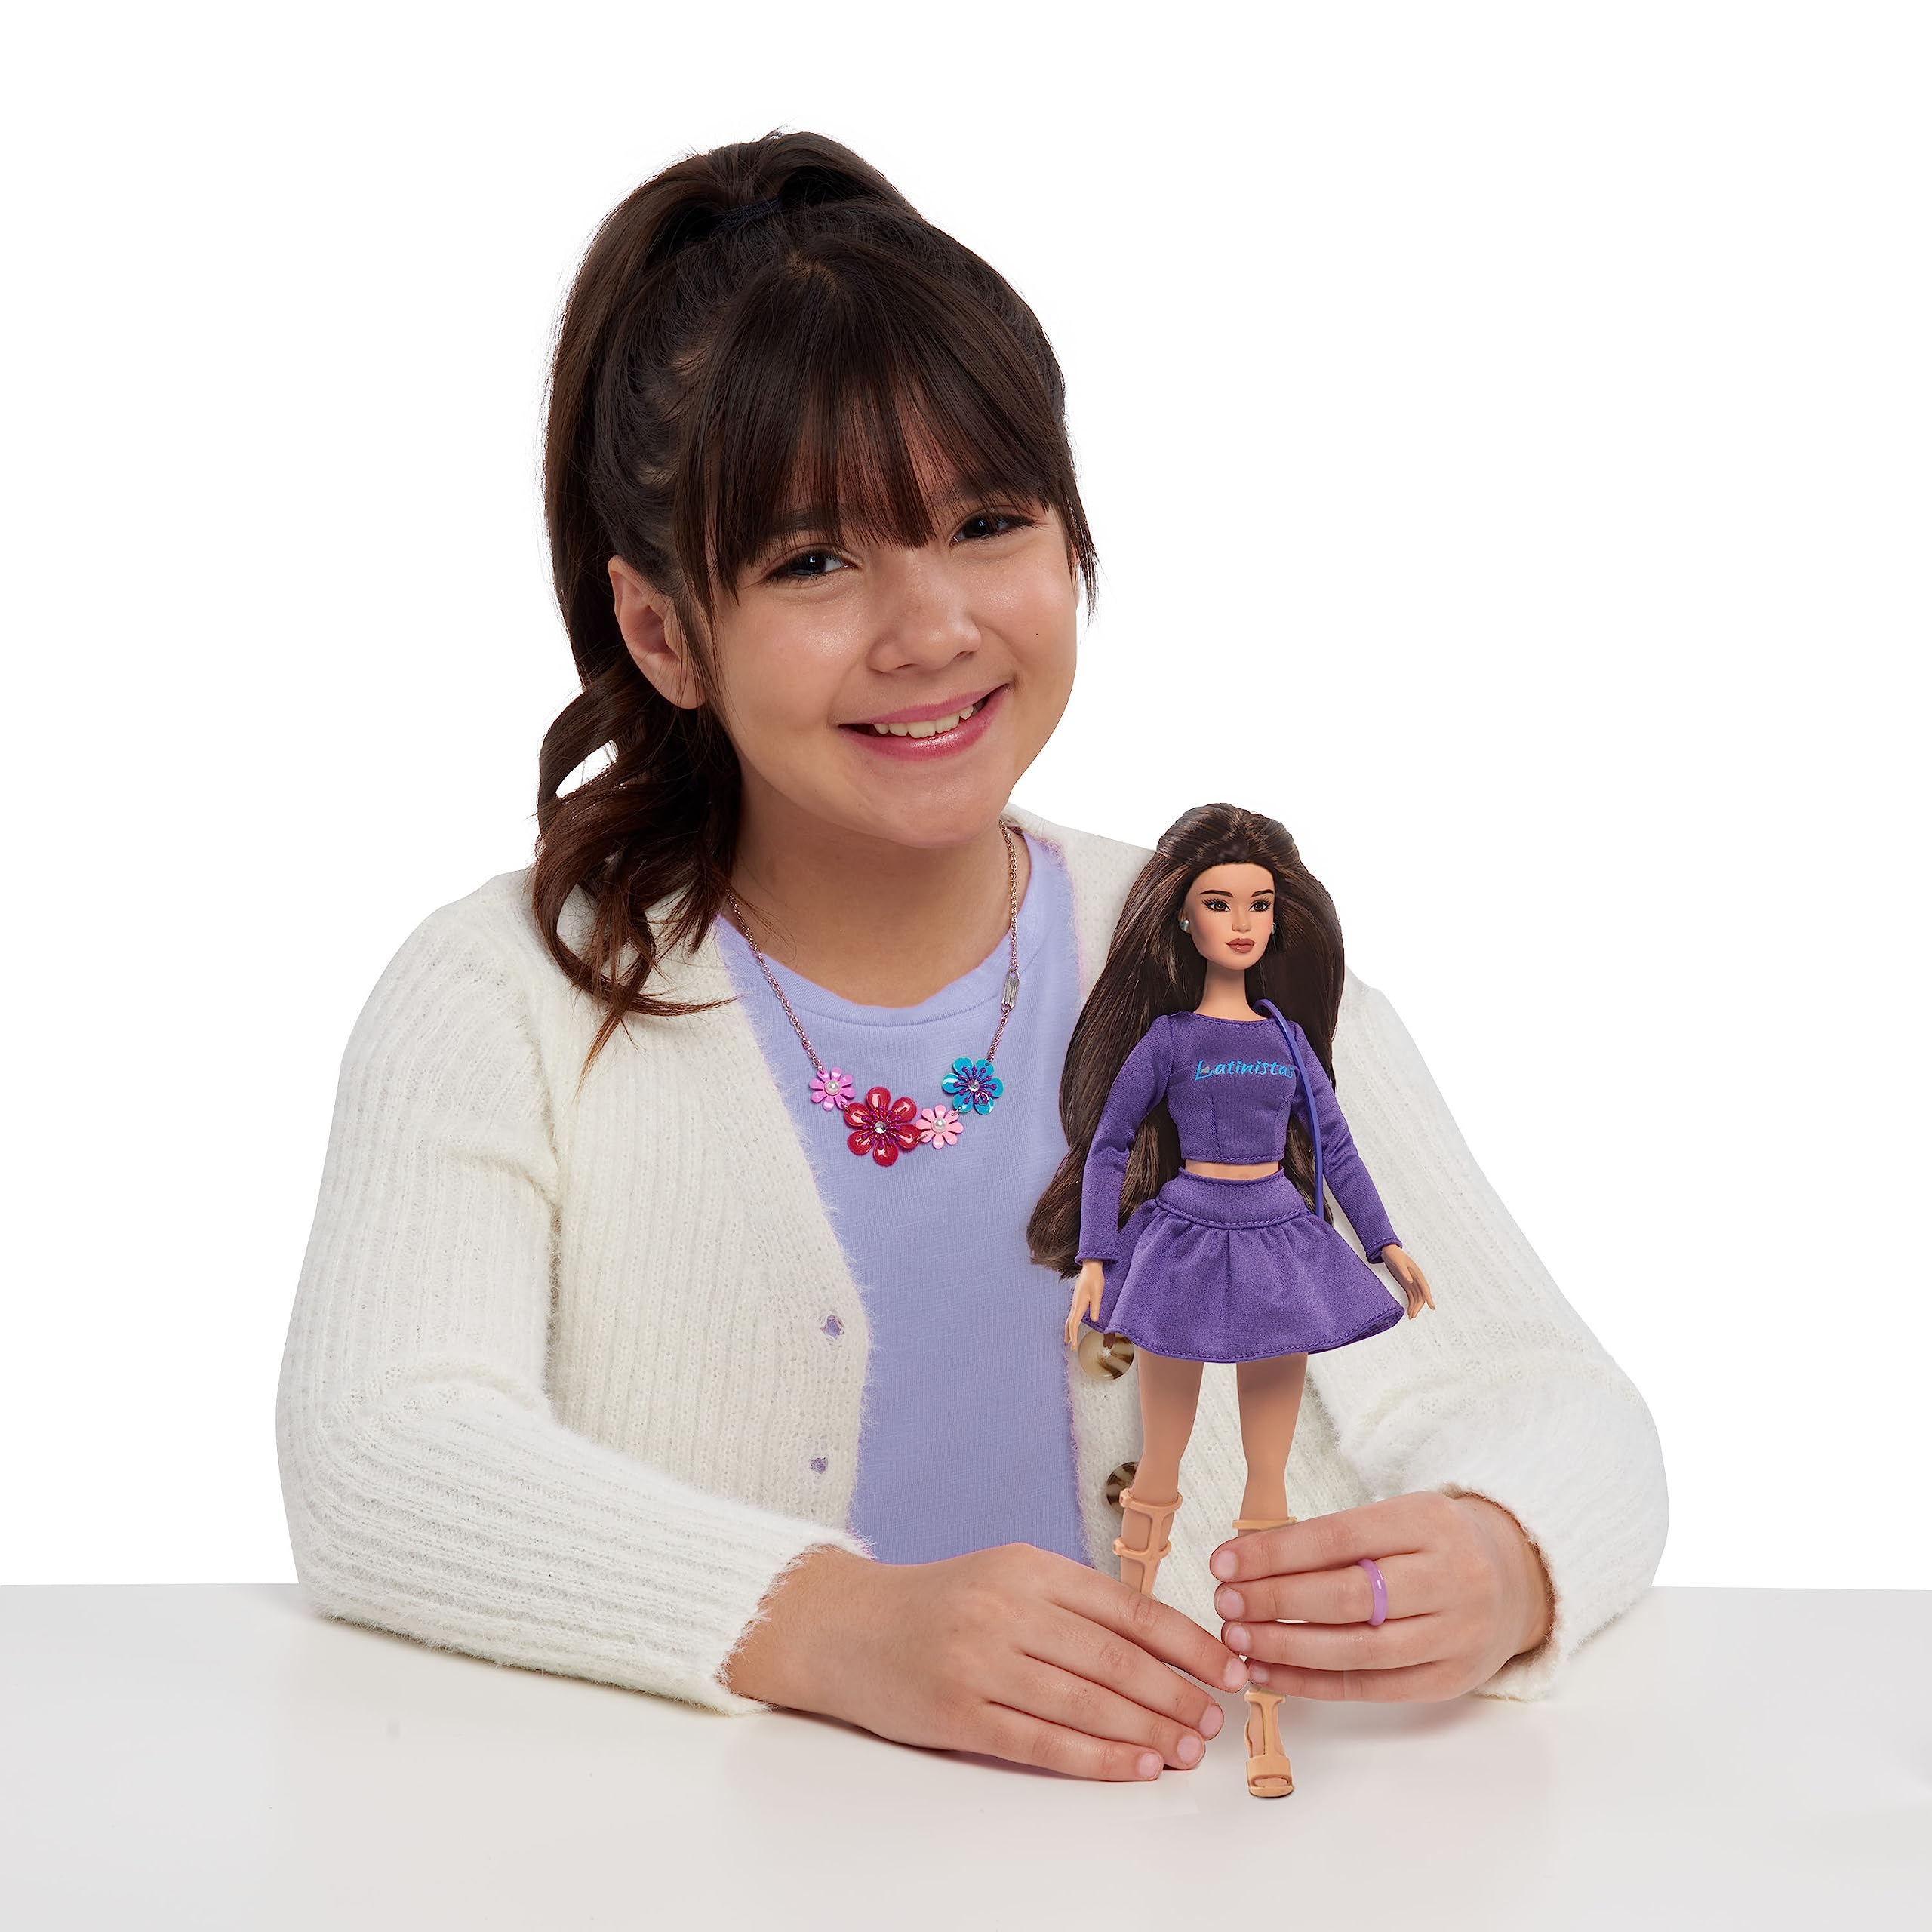 Purpose Toys The First All-Latina Line of Fashion Dolls, Latinistas 11.5-inch Dani Latina Fashion Doll and Accessories, Kids Toys for Ages 3 Up, Designed and Developed Latin